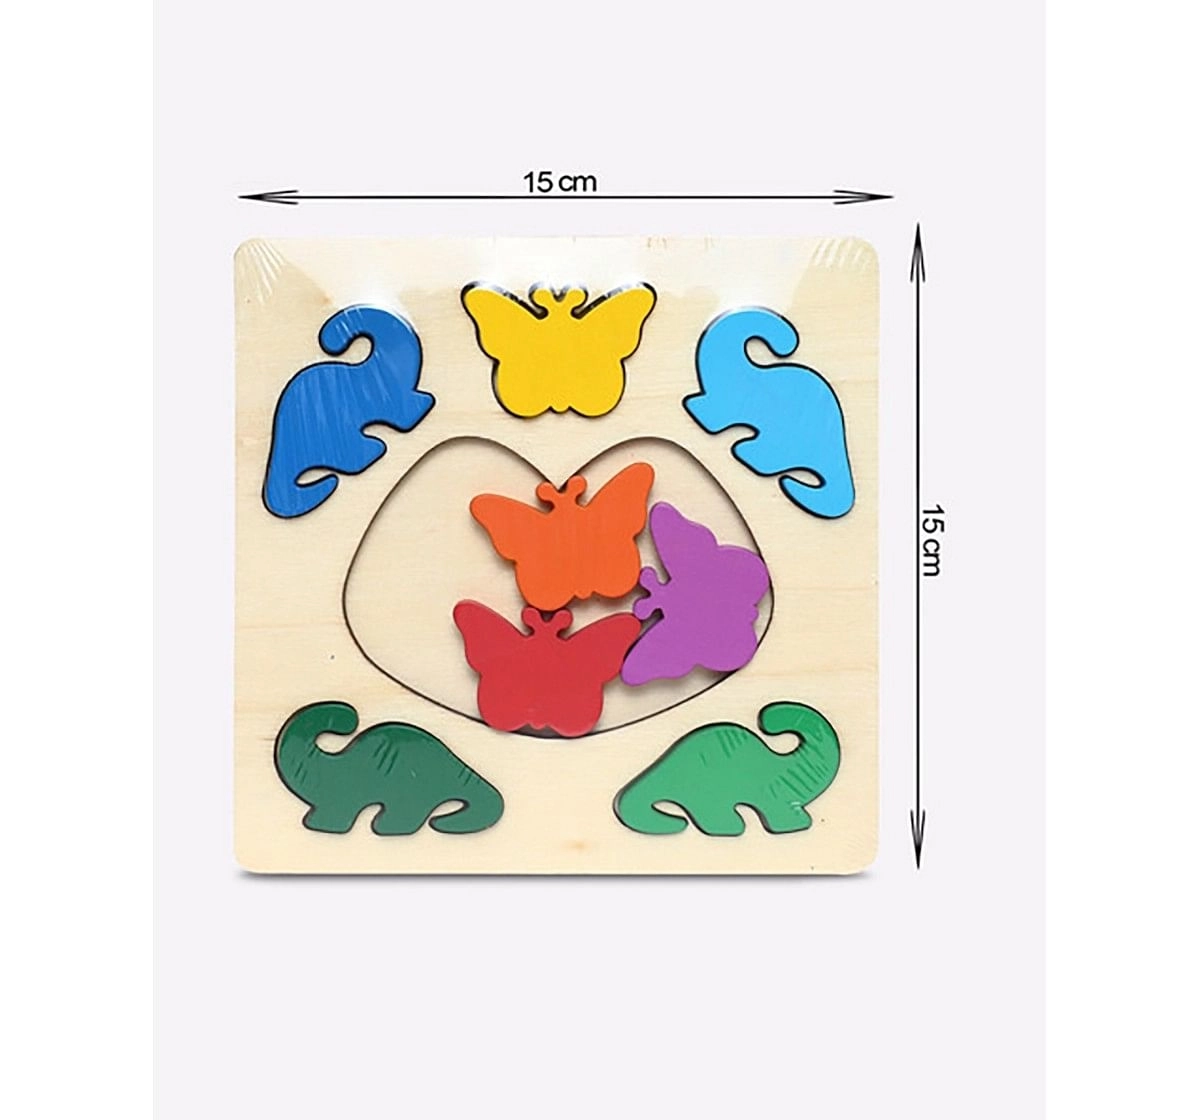 Mi Puzzles Fitting 2 In 1 Games for Kids age 6Y+ 